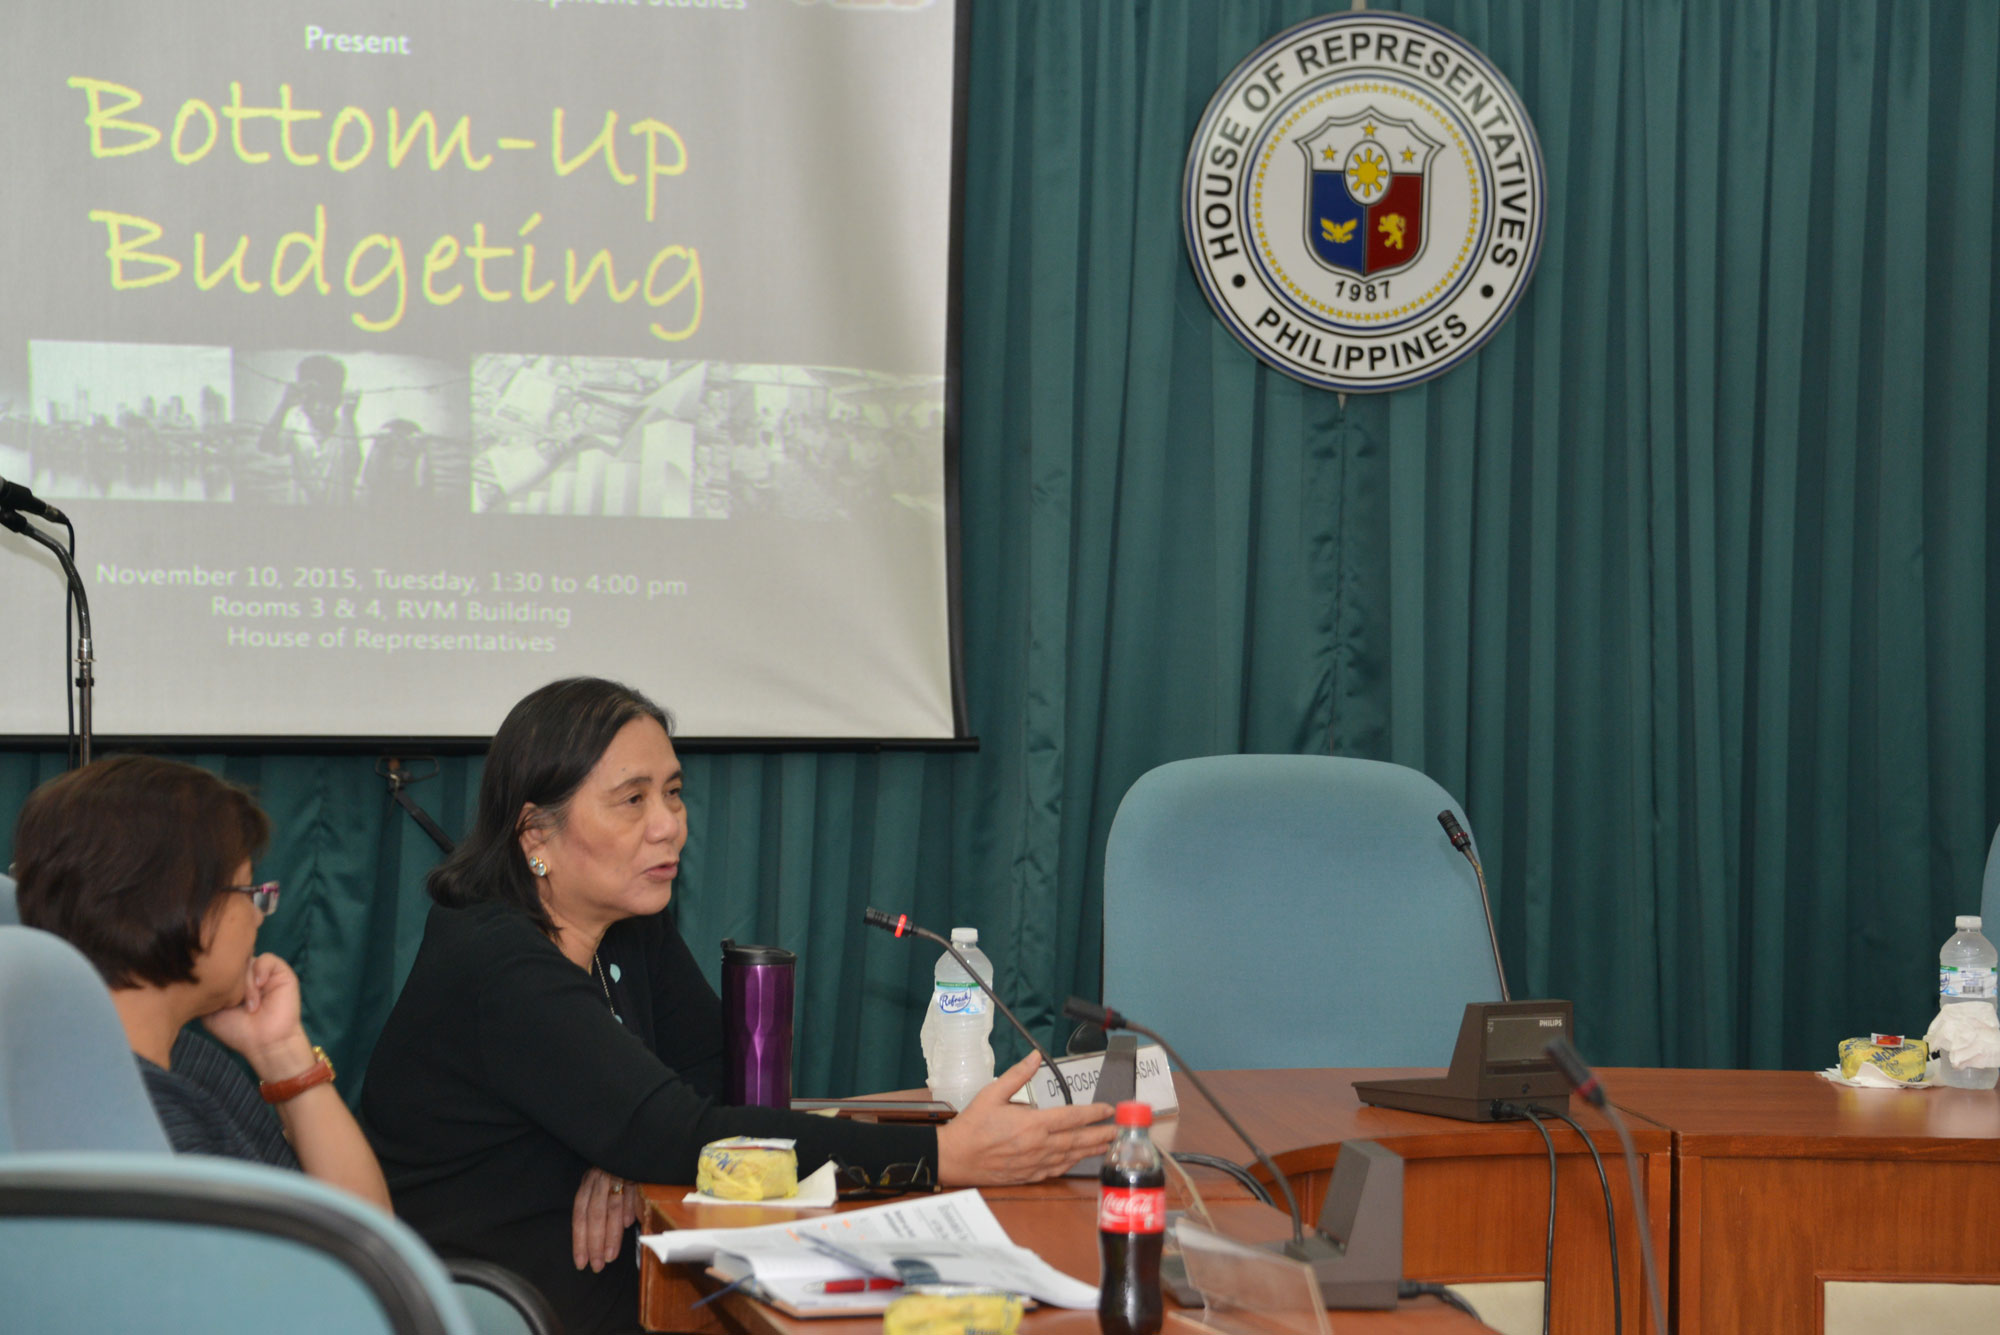 PIDS-CPBRD Forum Series: Assessment Of The Bottom-Up Budgeting Process For FY 2015-DSC_0639.jpg